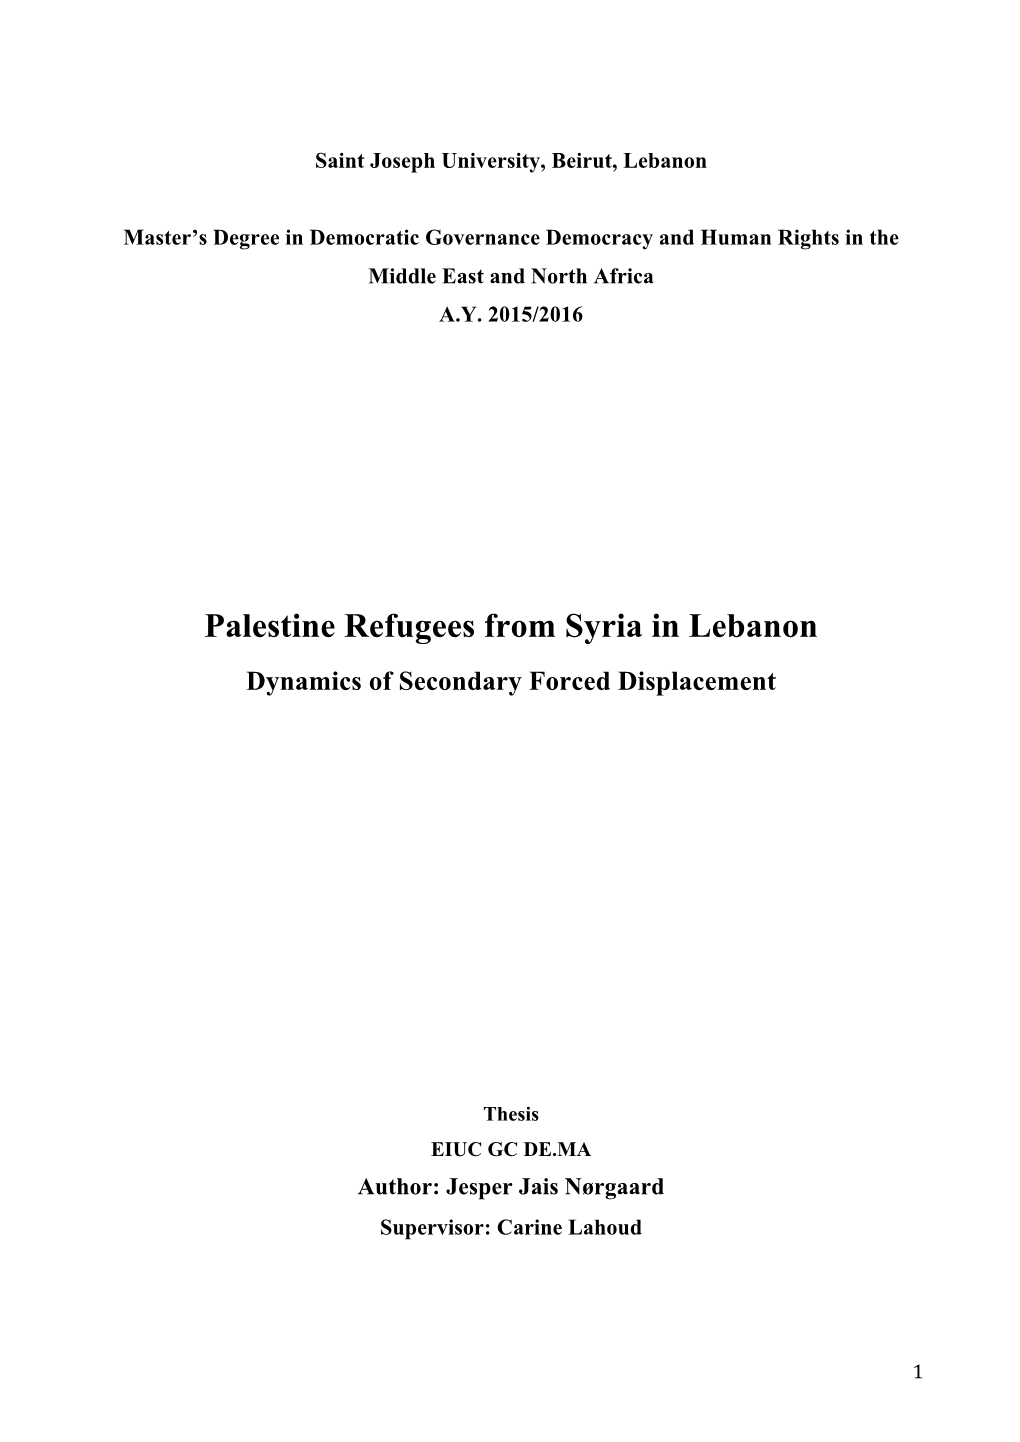 Palestine Refugees from Syria in Lebanon Dynamics of Secondary Forced Displacement